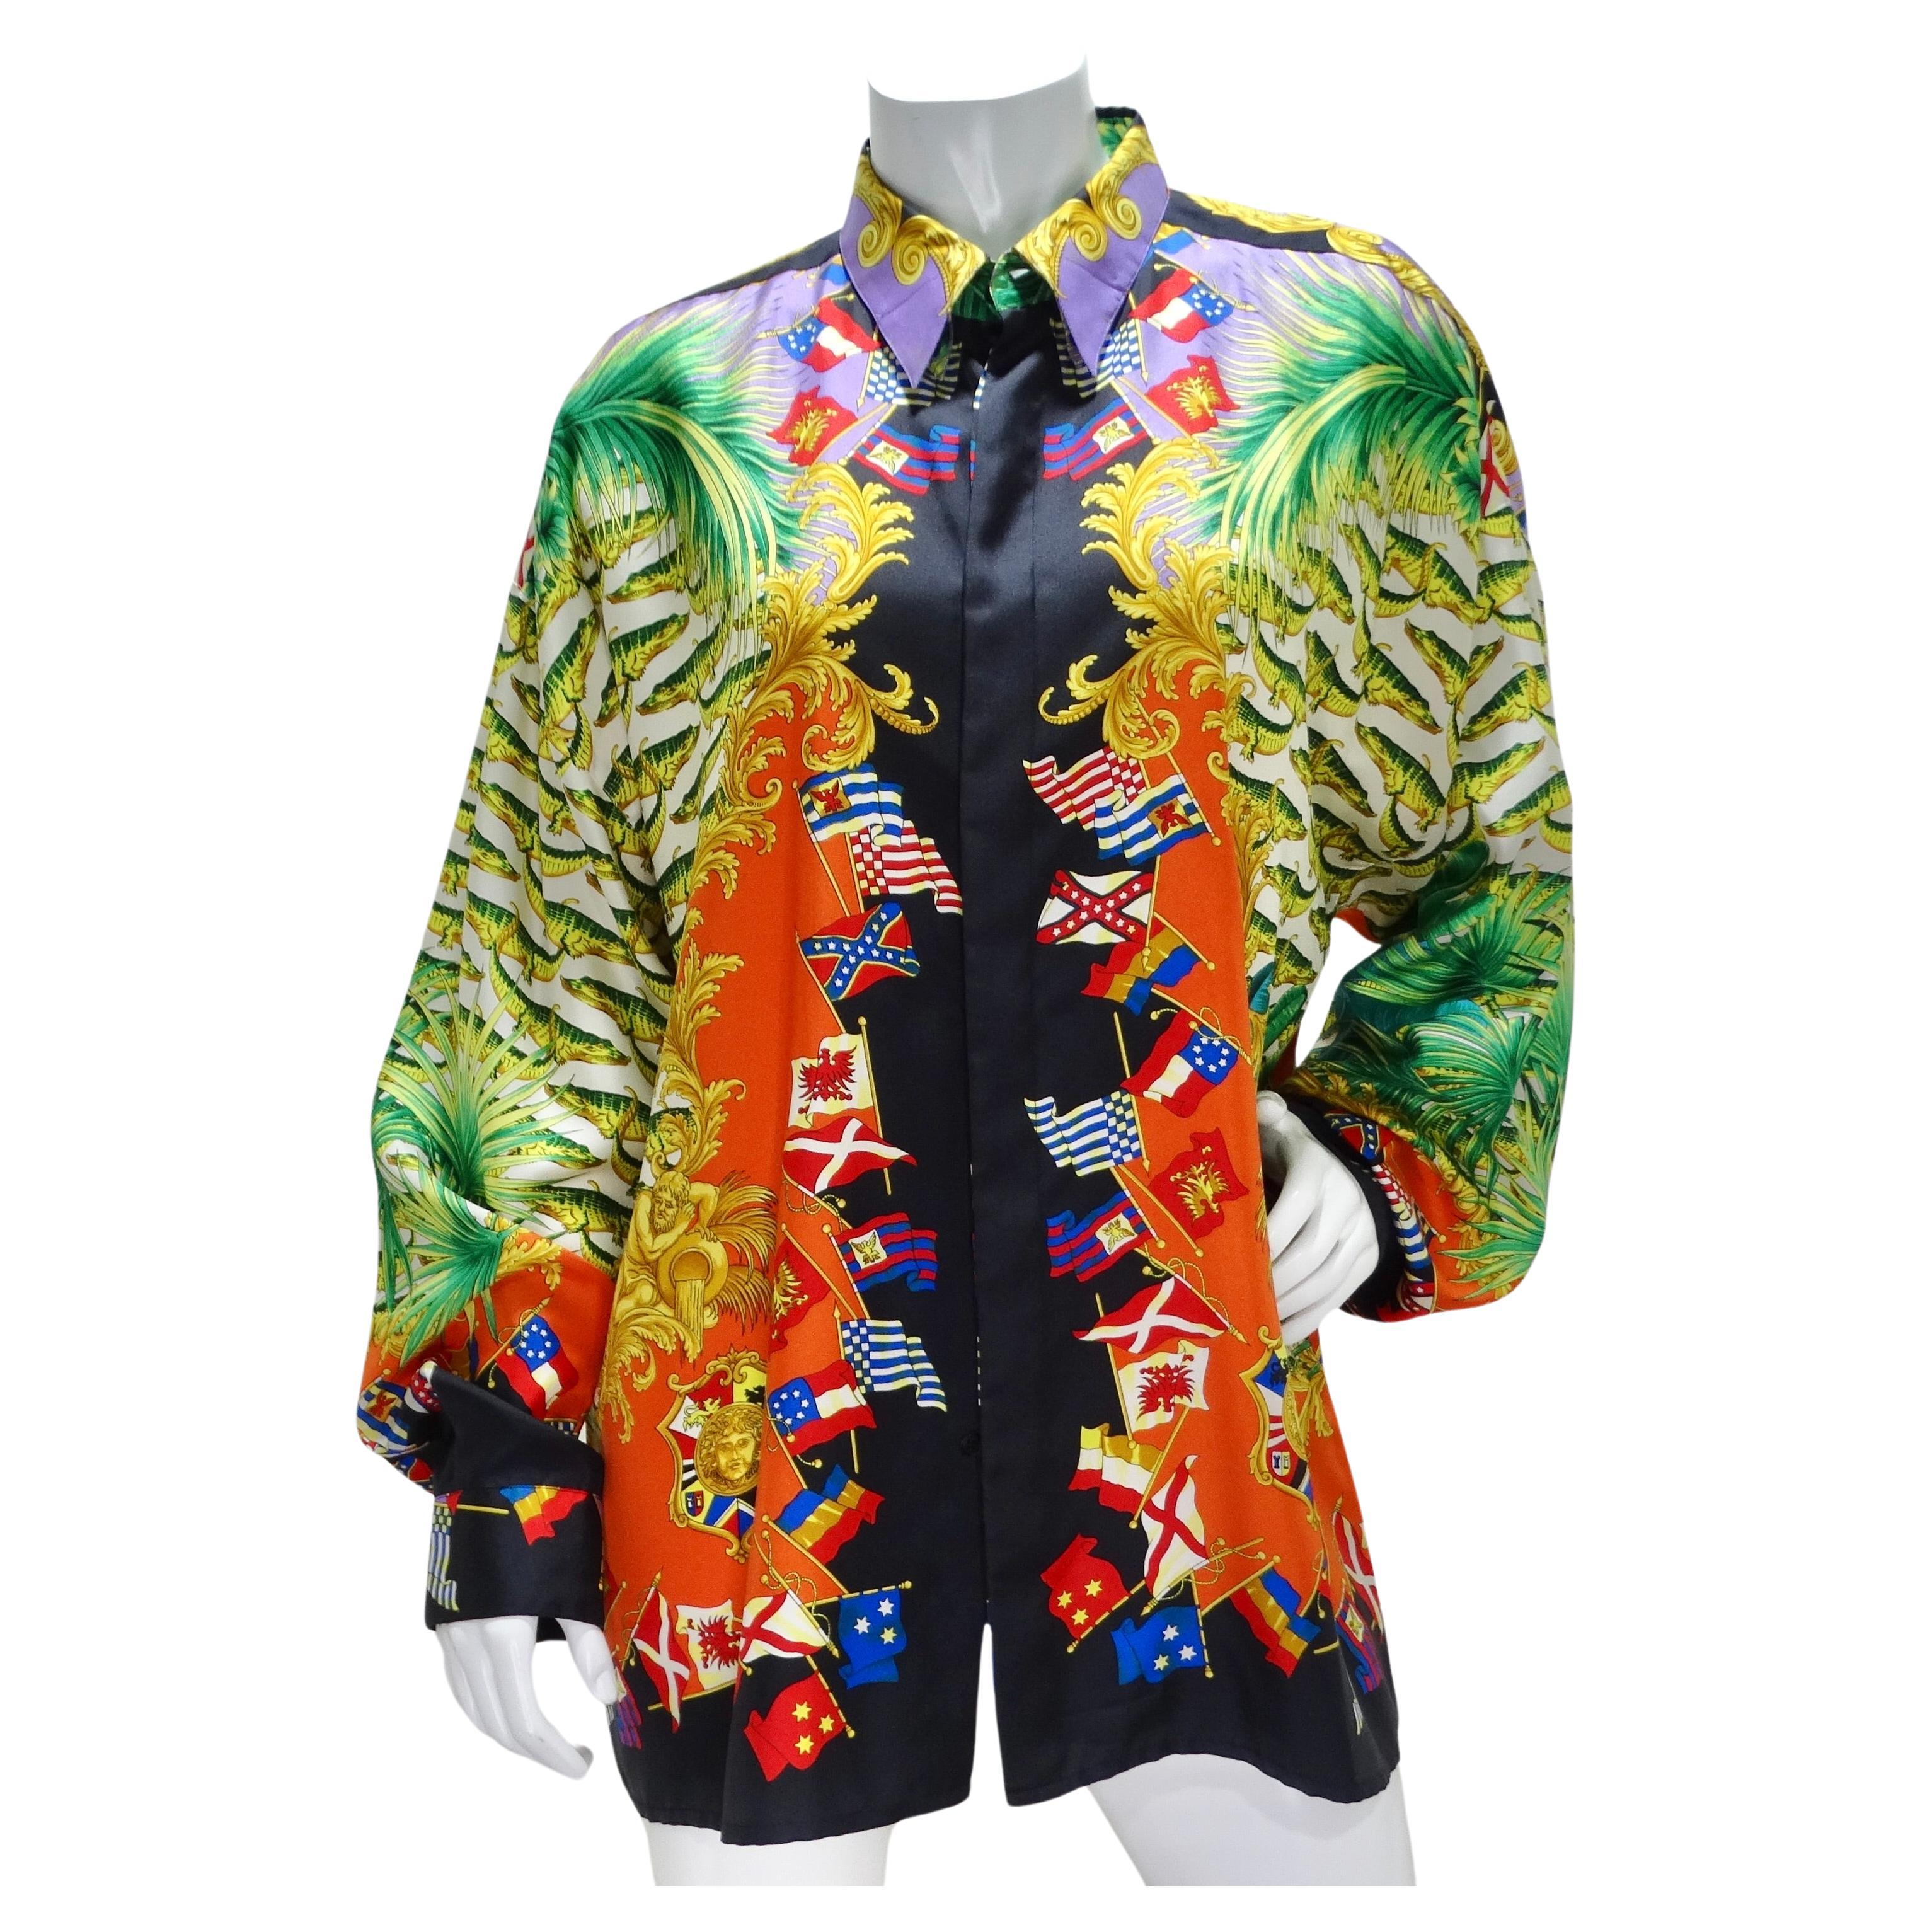 Gianna Versace SS 1993 Miami Collection Silk Shirt For Sale